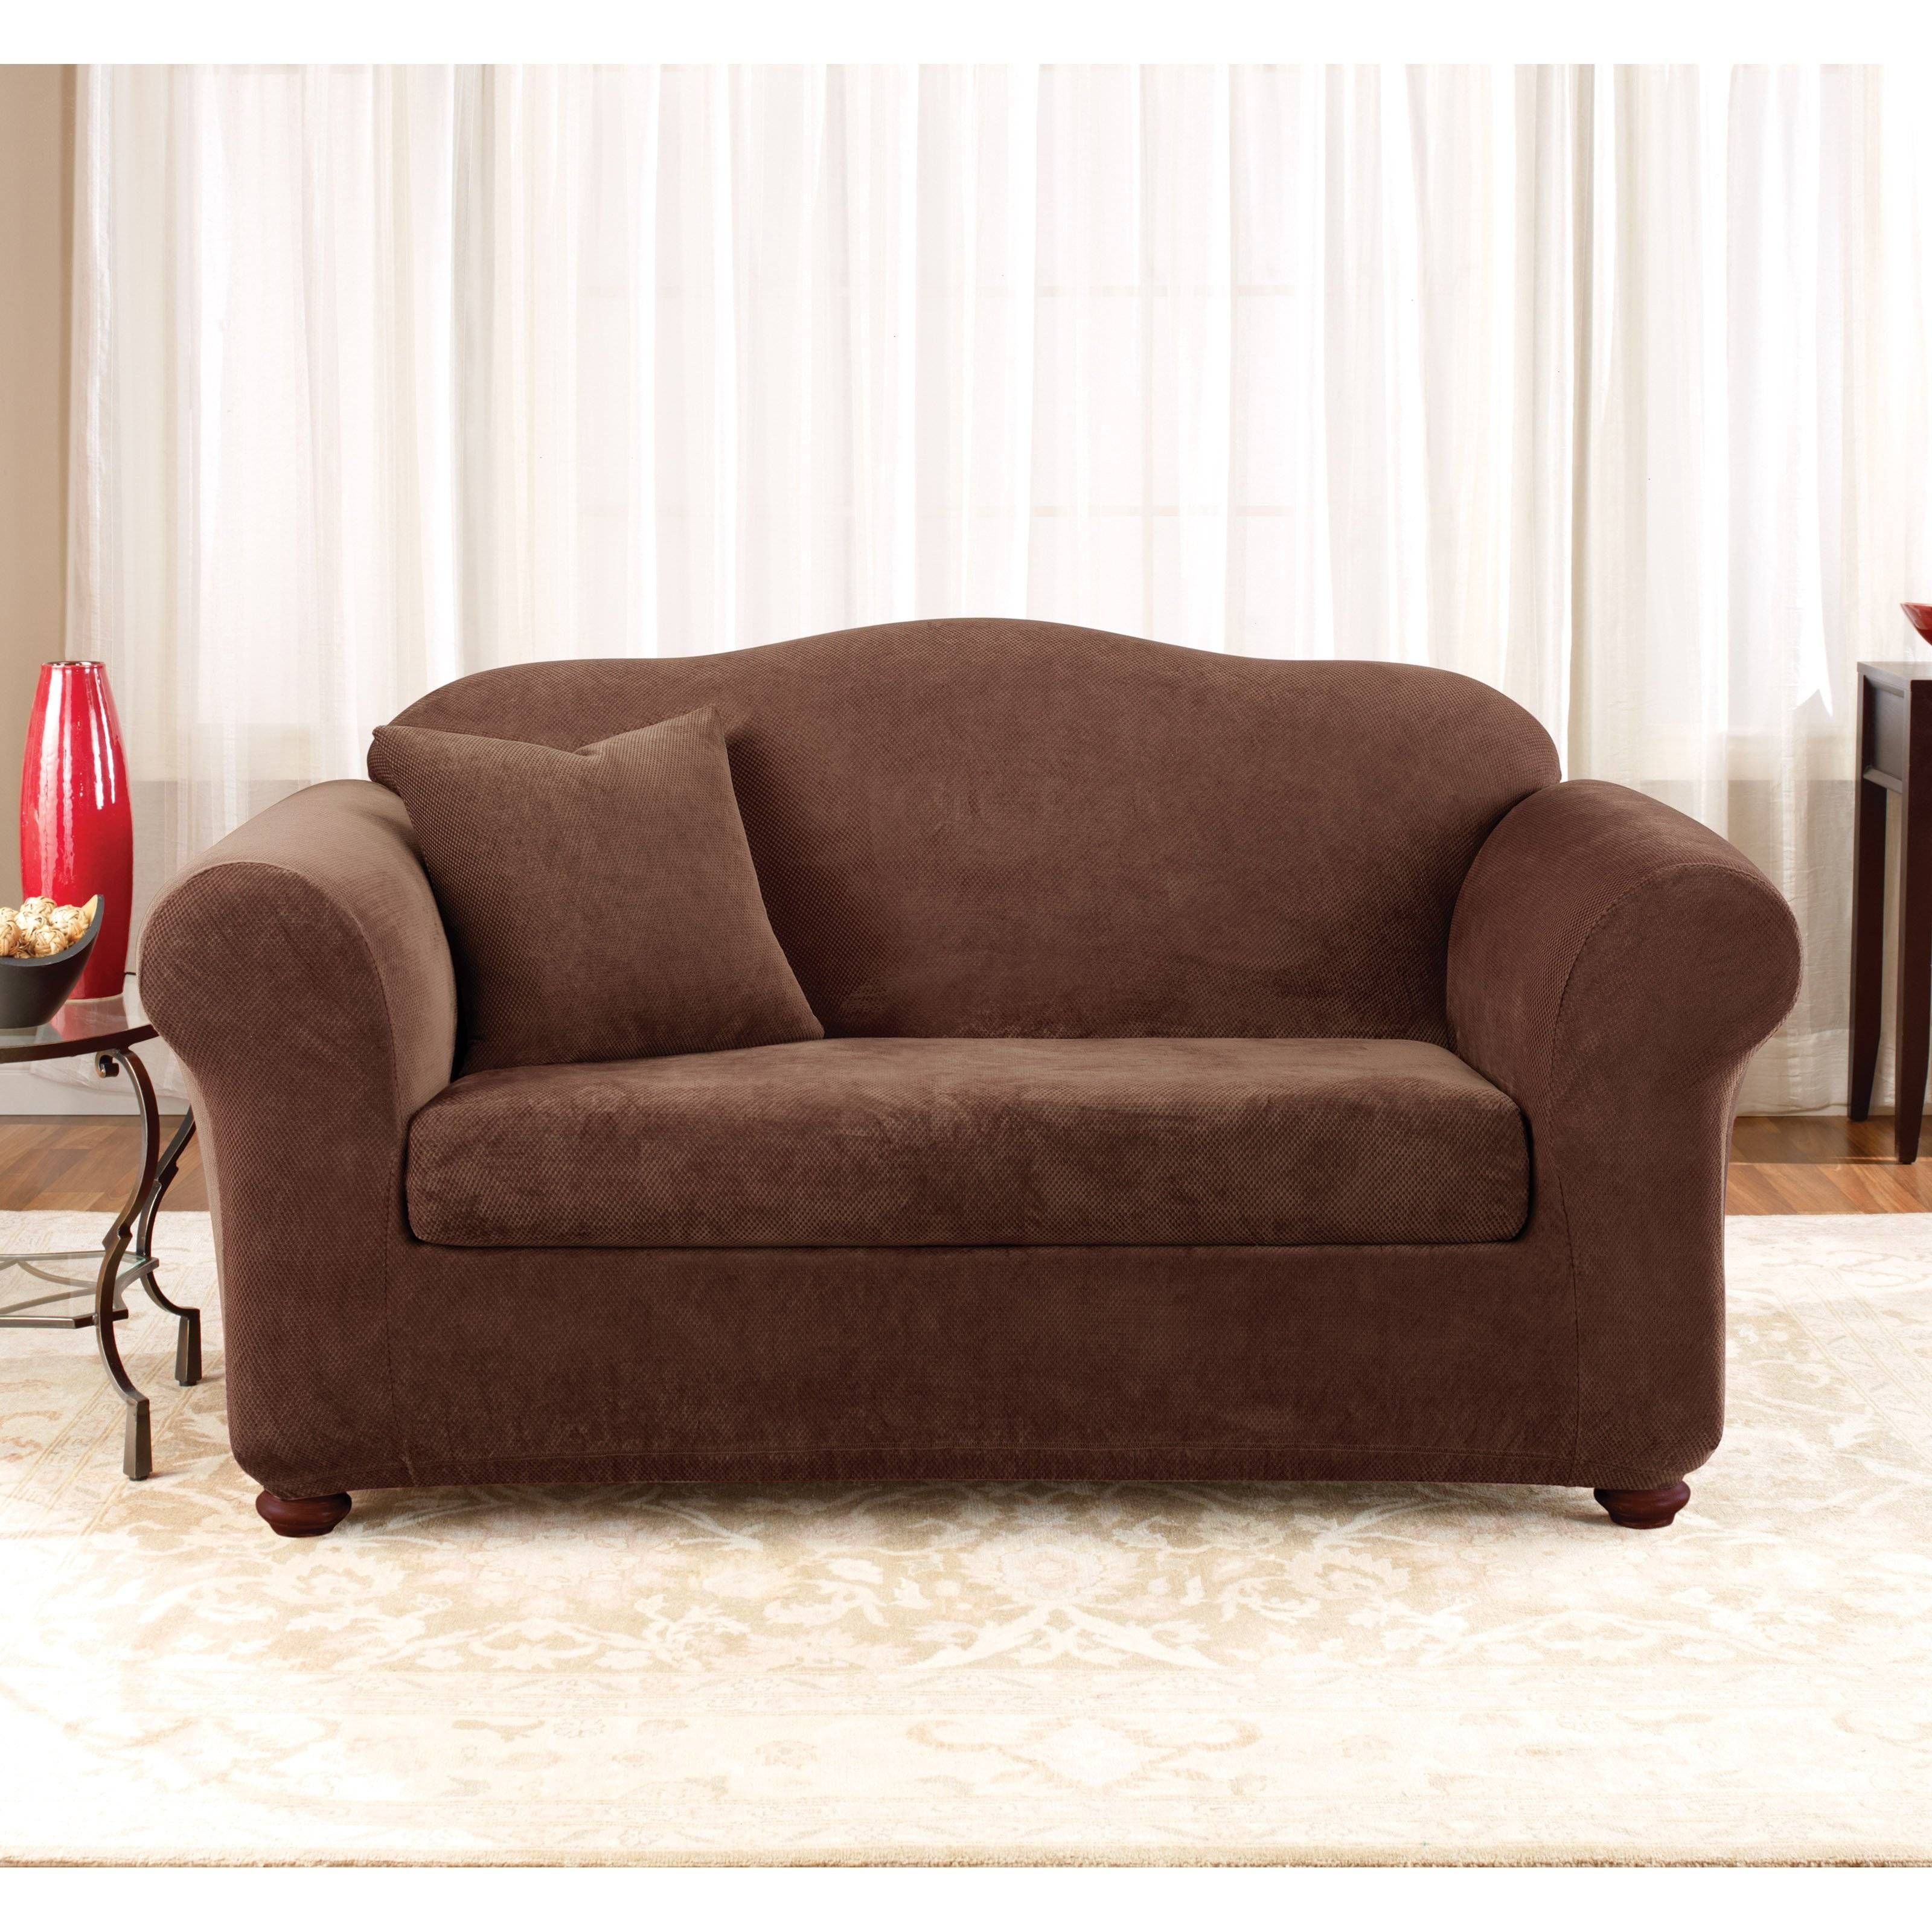 Furniture: Walmart Slipcovers | Slipcovers For Sofas And Loveseats Throughout Walmart Slipcovers For Sofas (Photo 13 of 30)